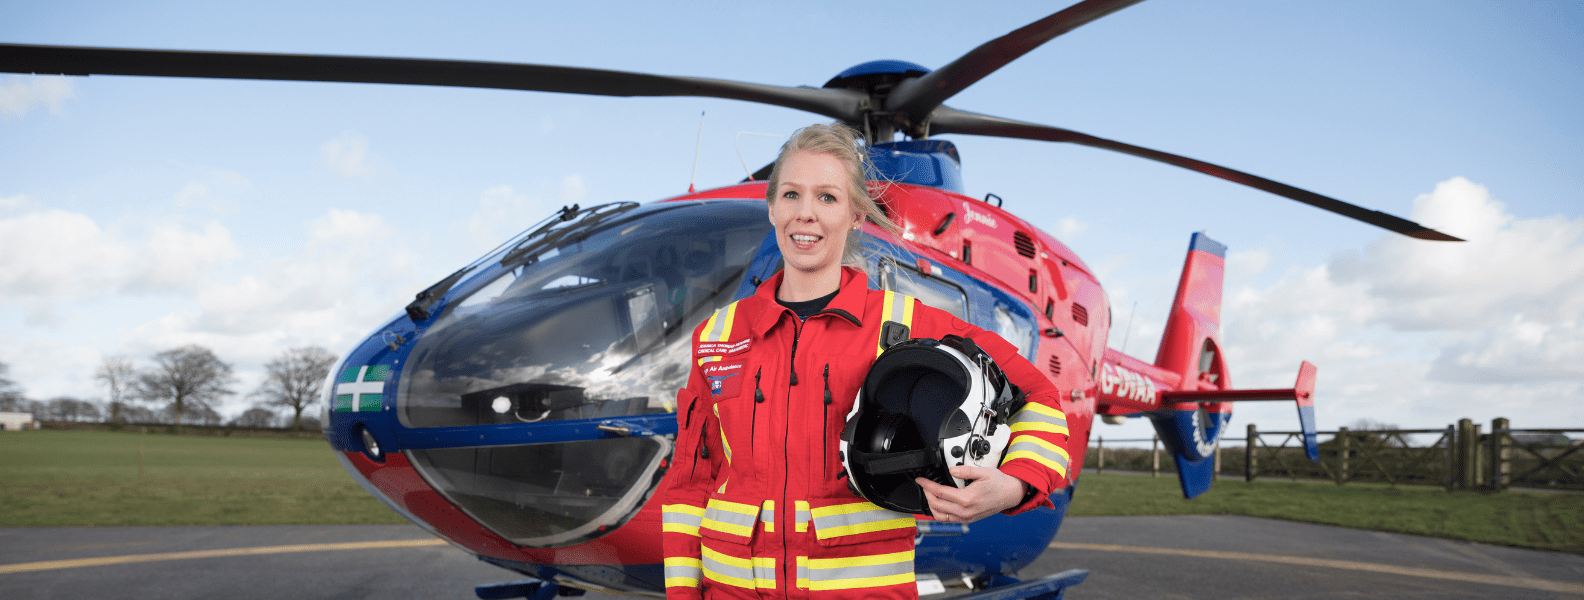 Jessica Thomas-Mourne from Devon Air Ambulance smiling